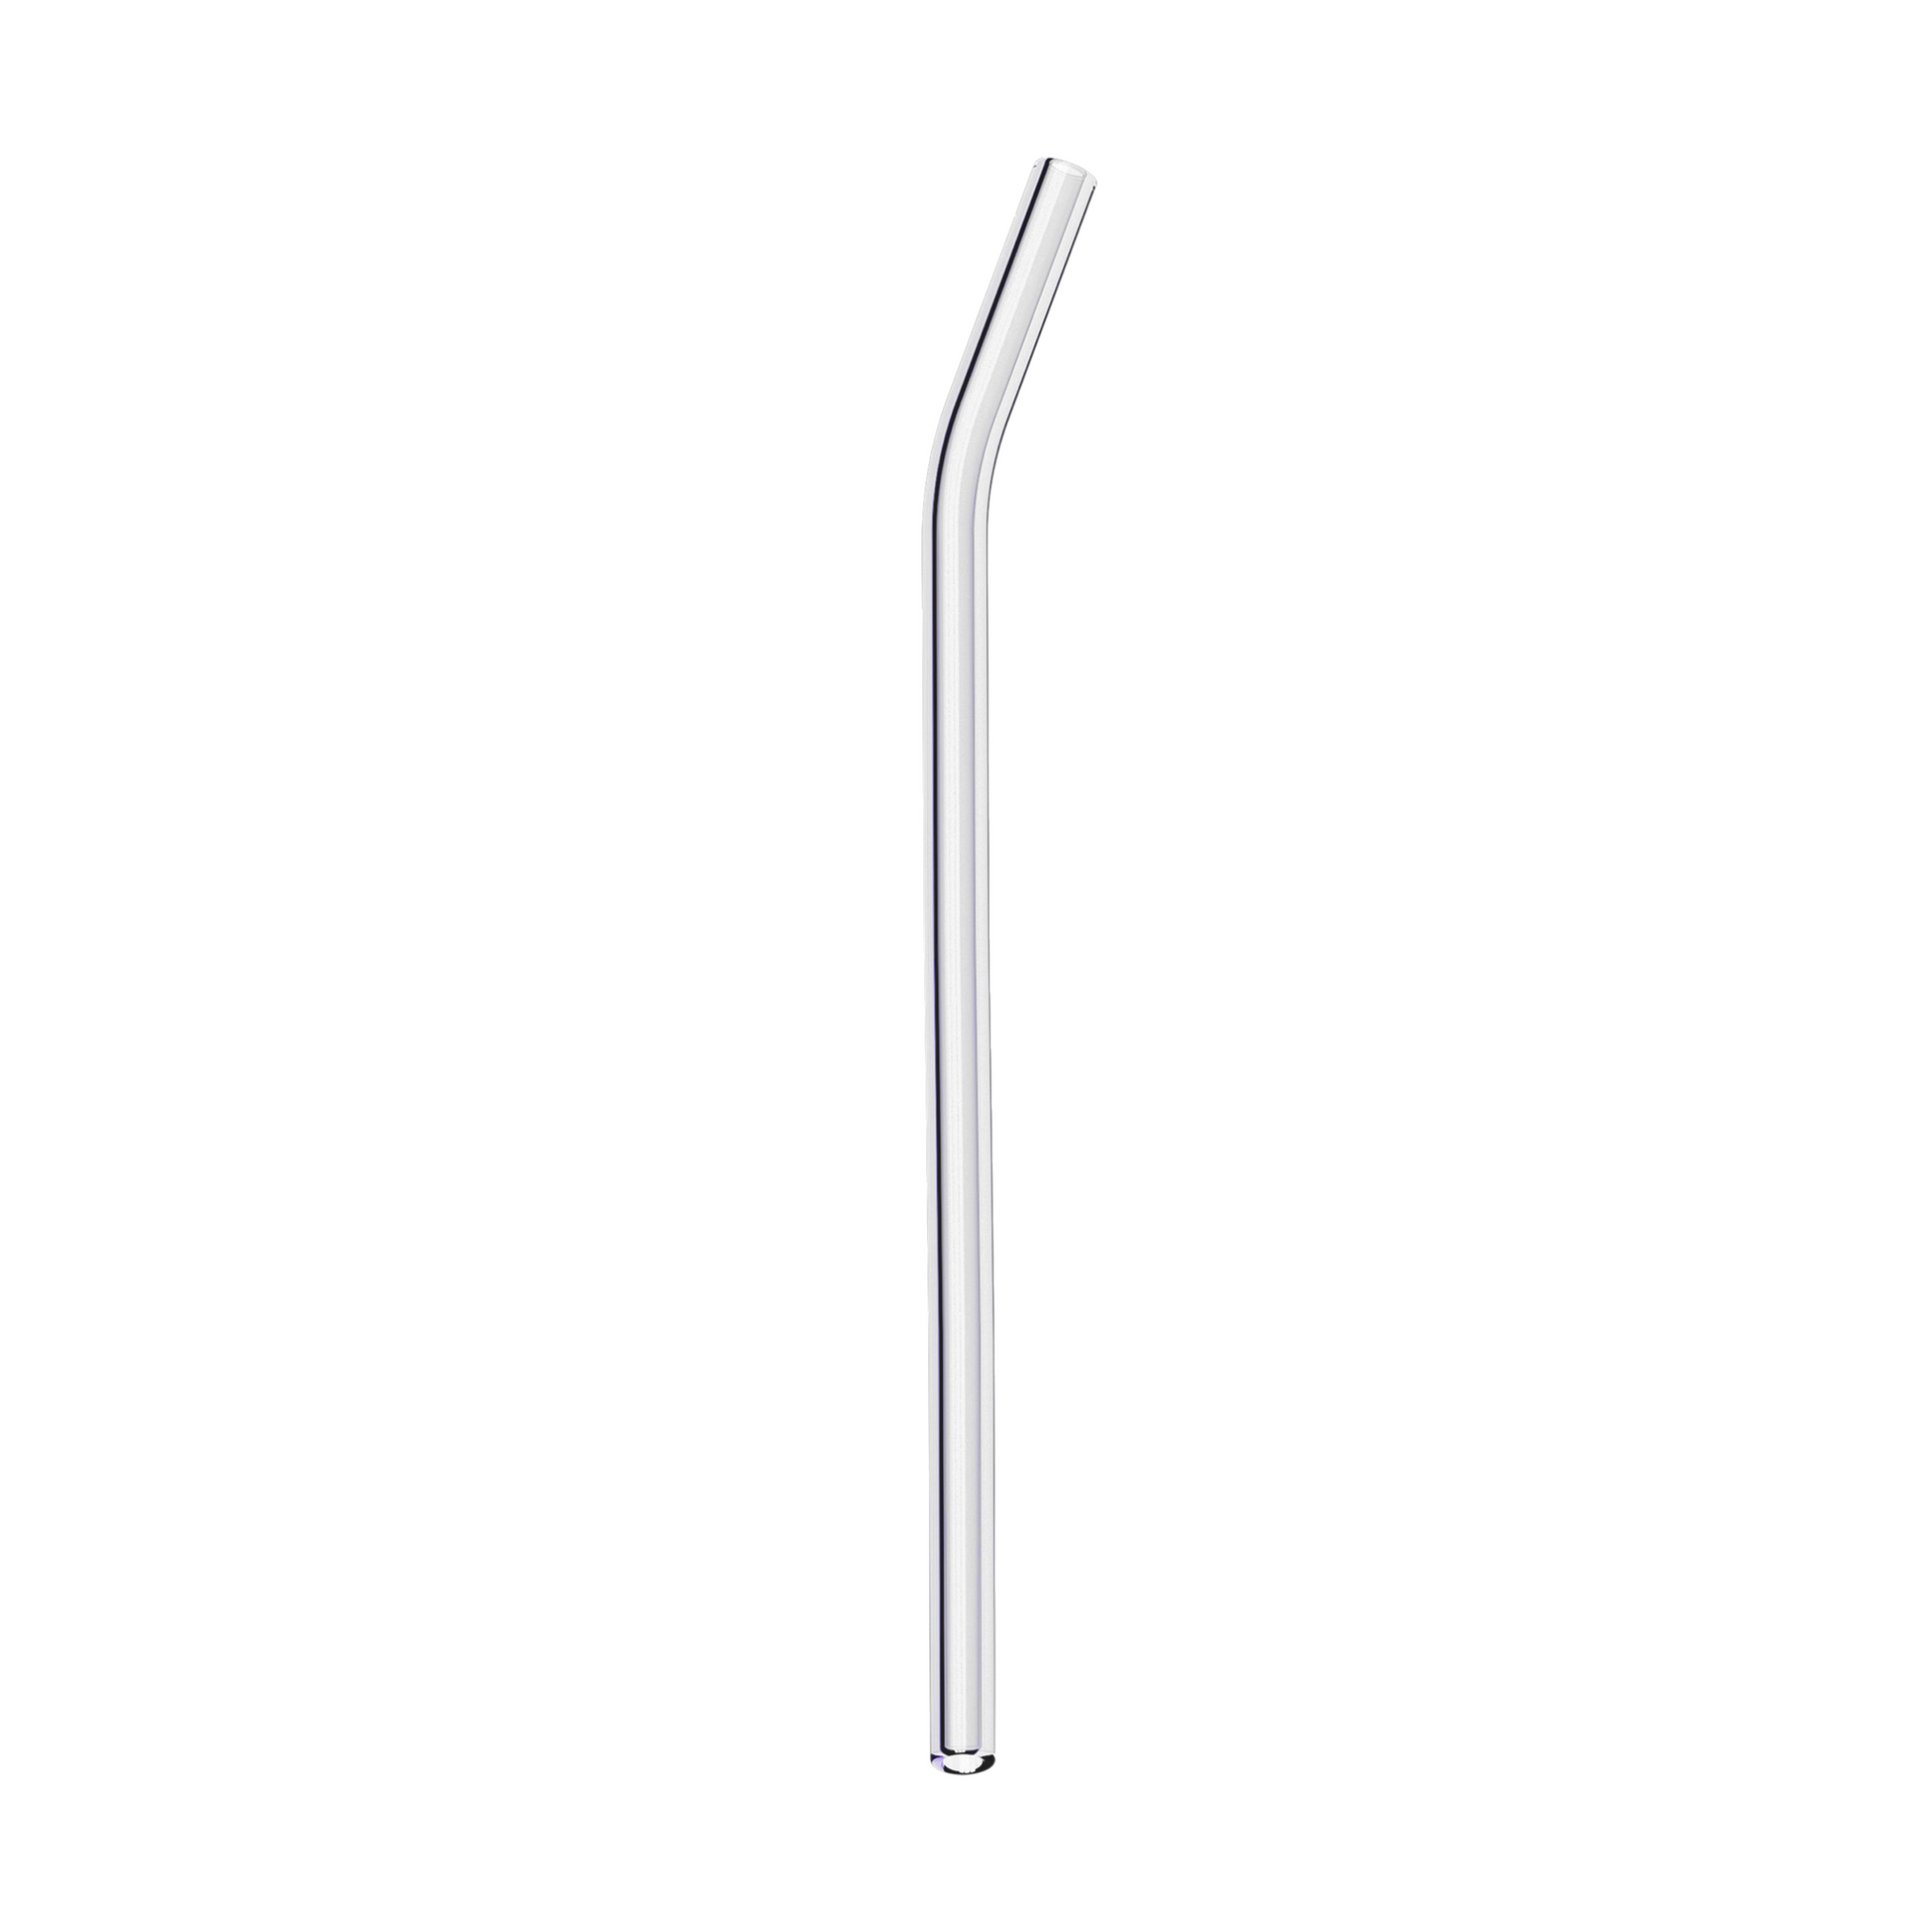 Clear Reusable Glass Straws